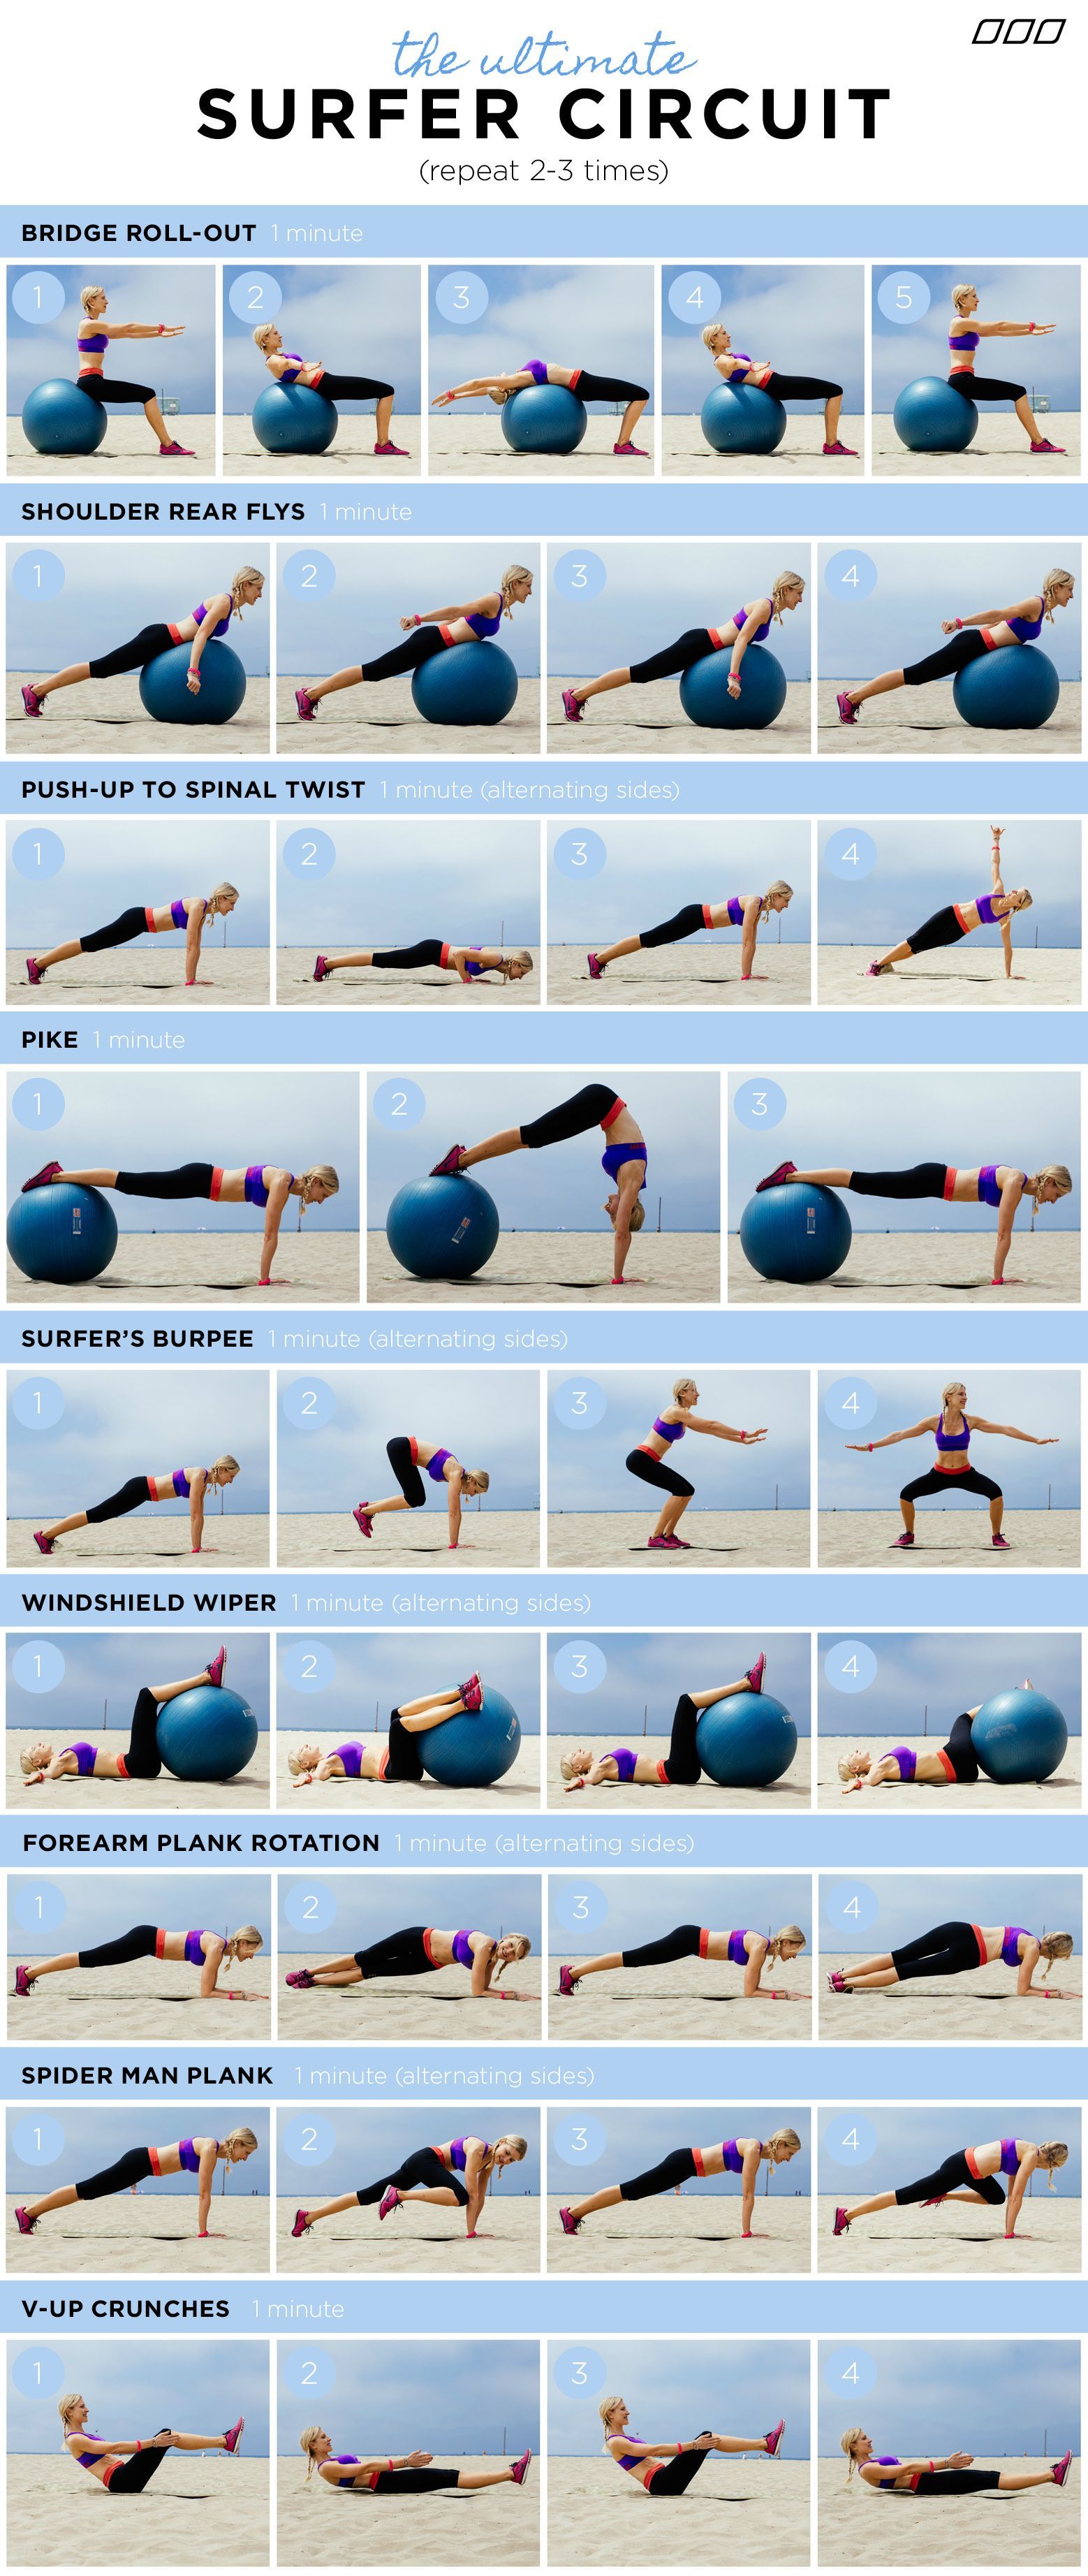 The Ultimate Surfer Workout by Moni